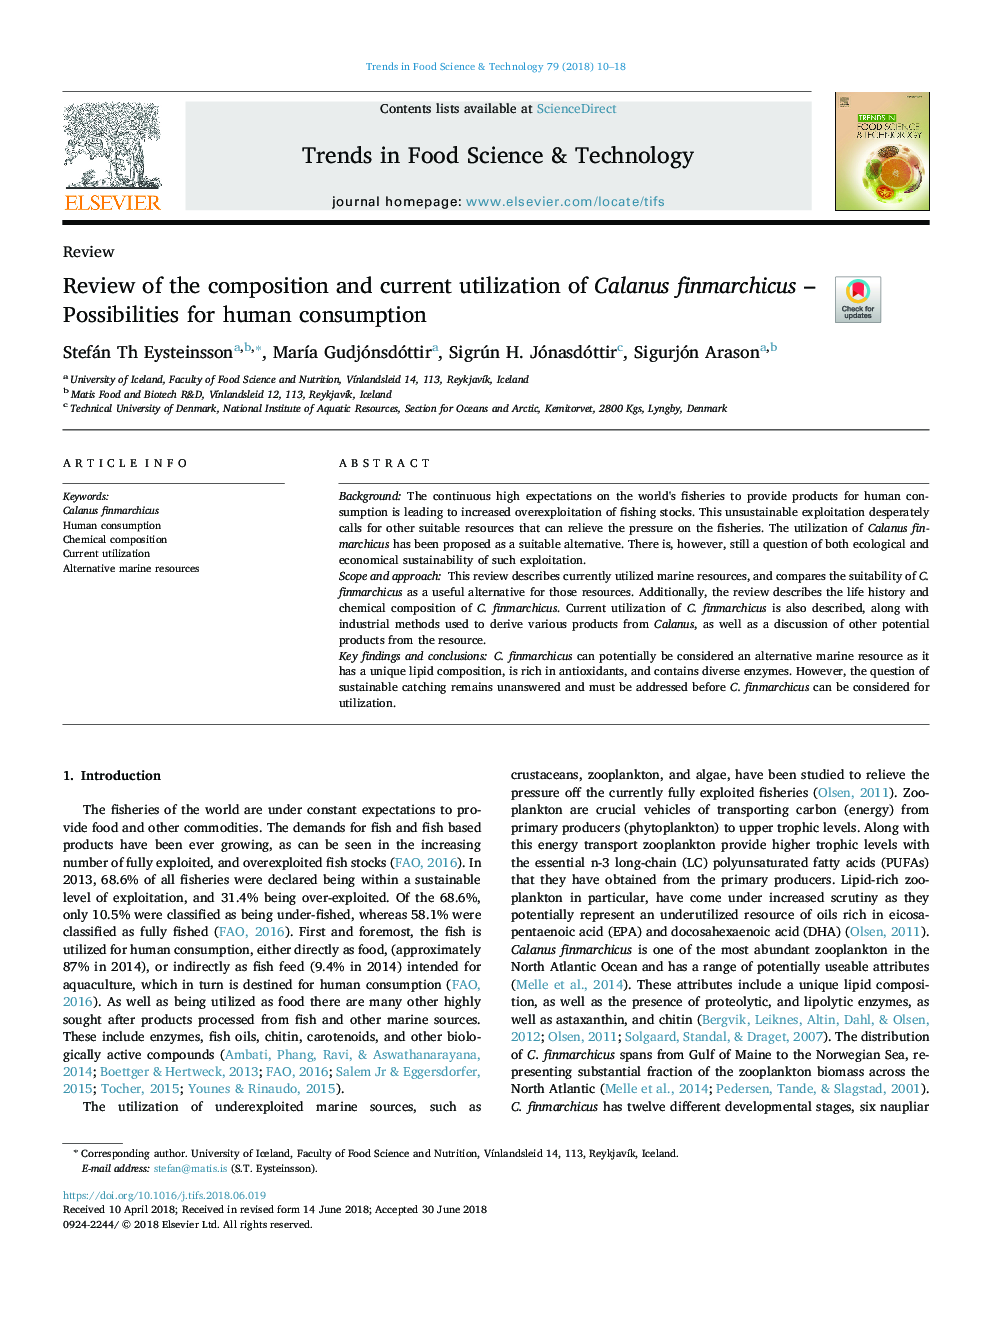 Review of the composition and current utilization of Calanus finmarchicus - Possibilities for human consumption